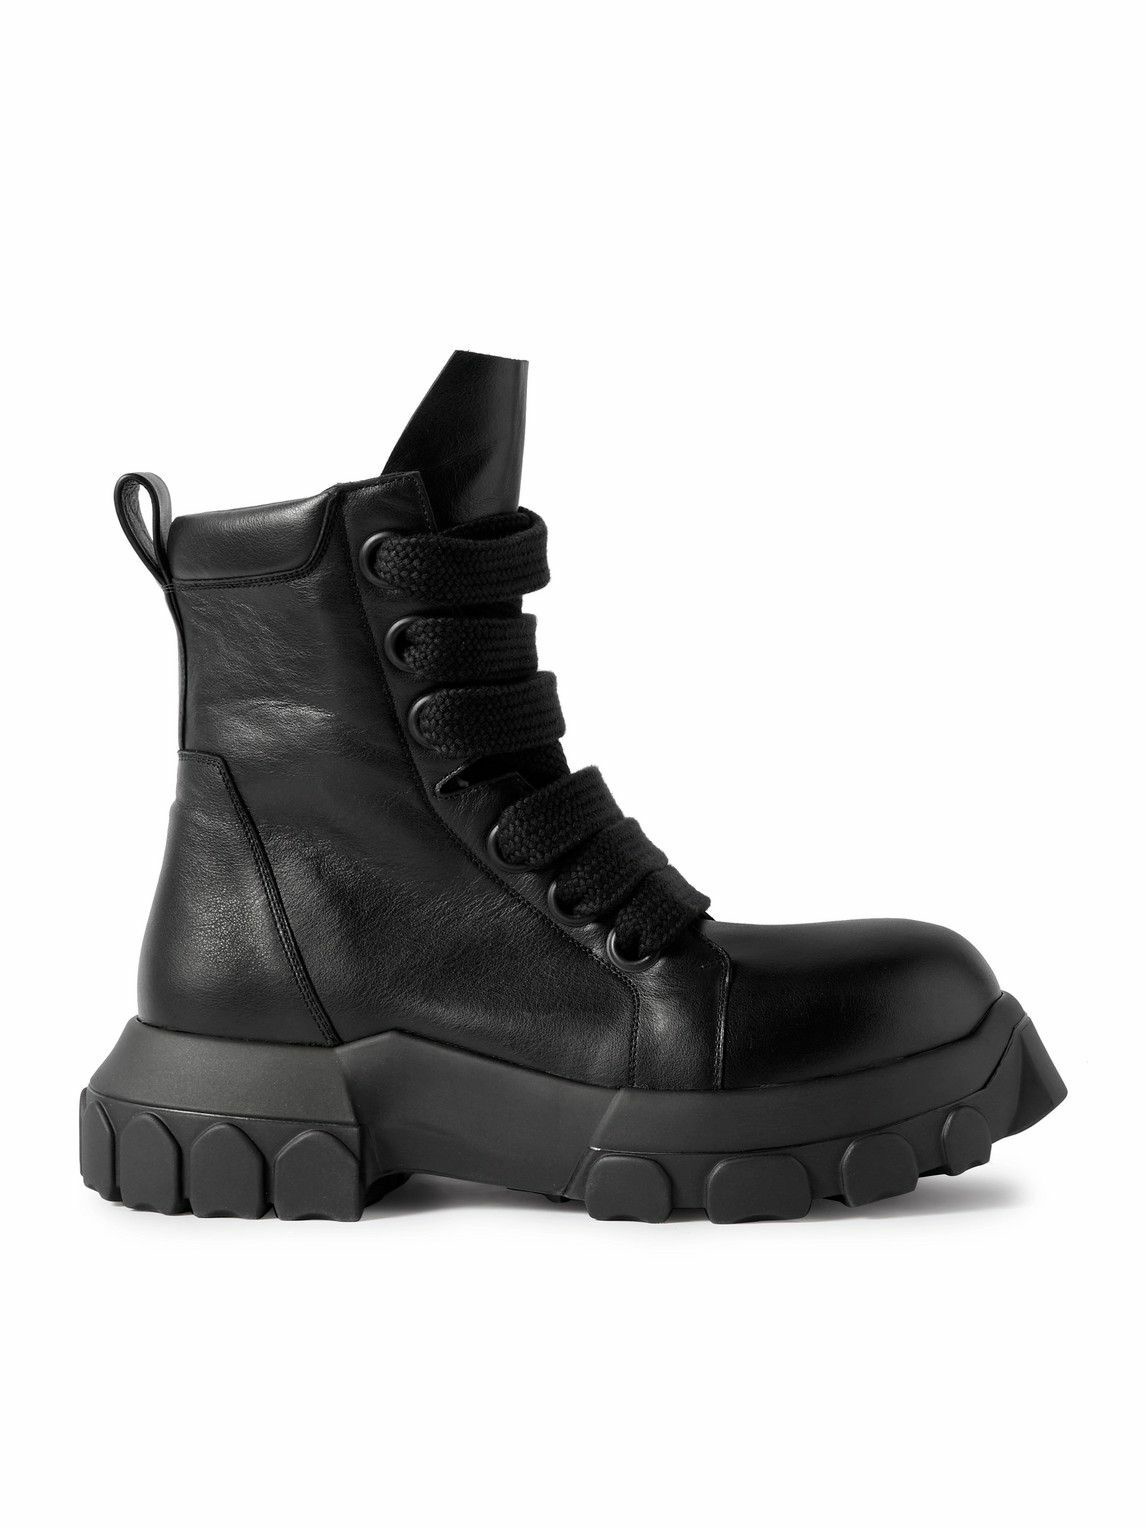 Rick Owens Black and White Hiking Lace-Up Boots Rick Owens